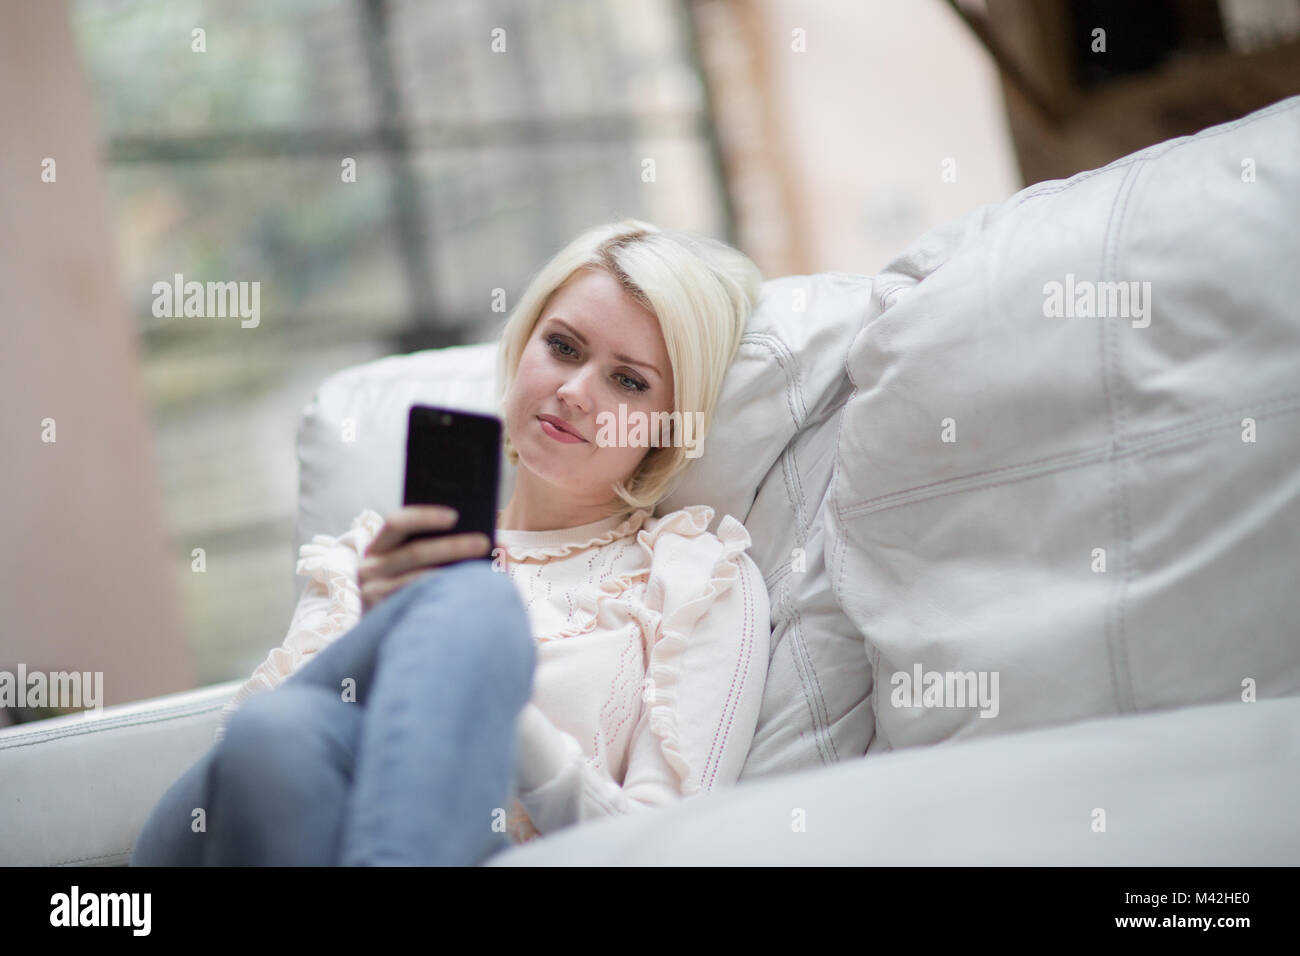 Young adult female on smartphone Stock Photo